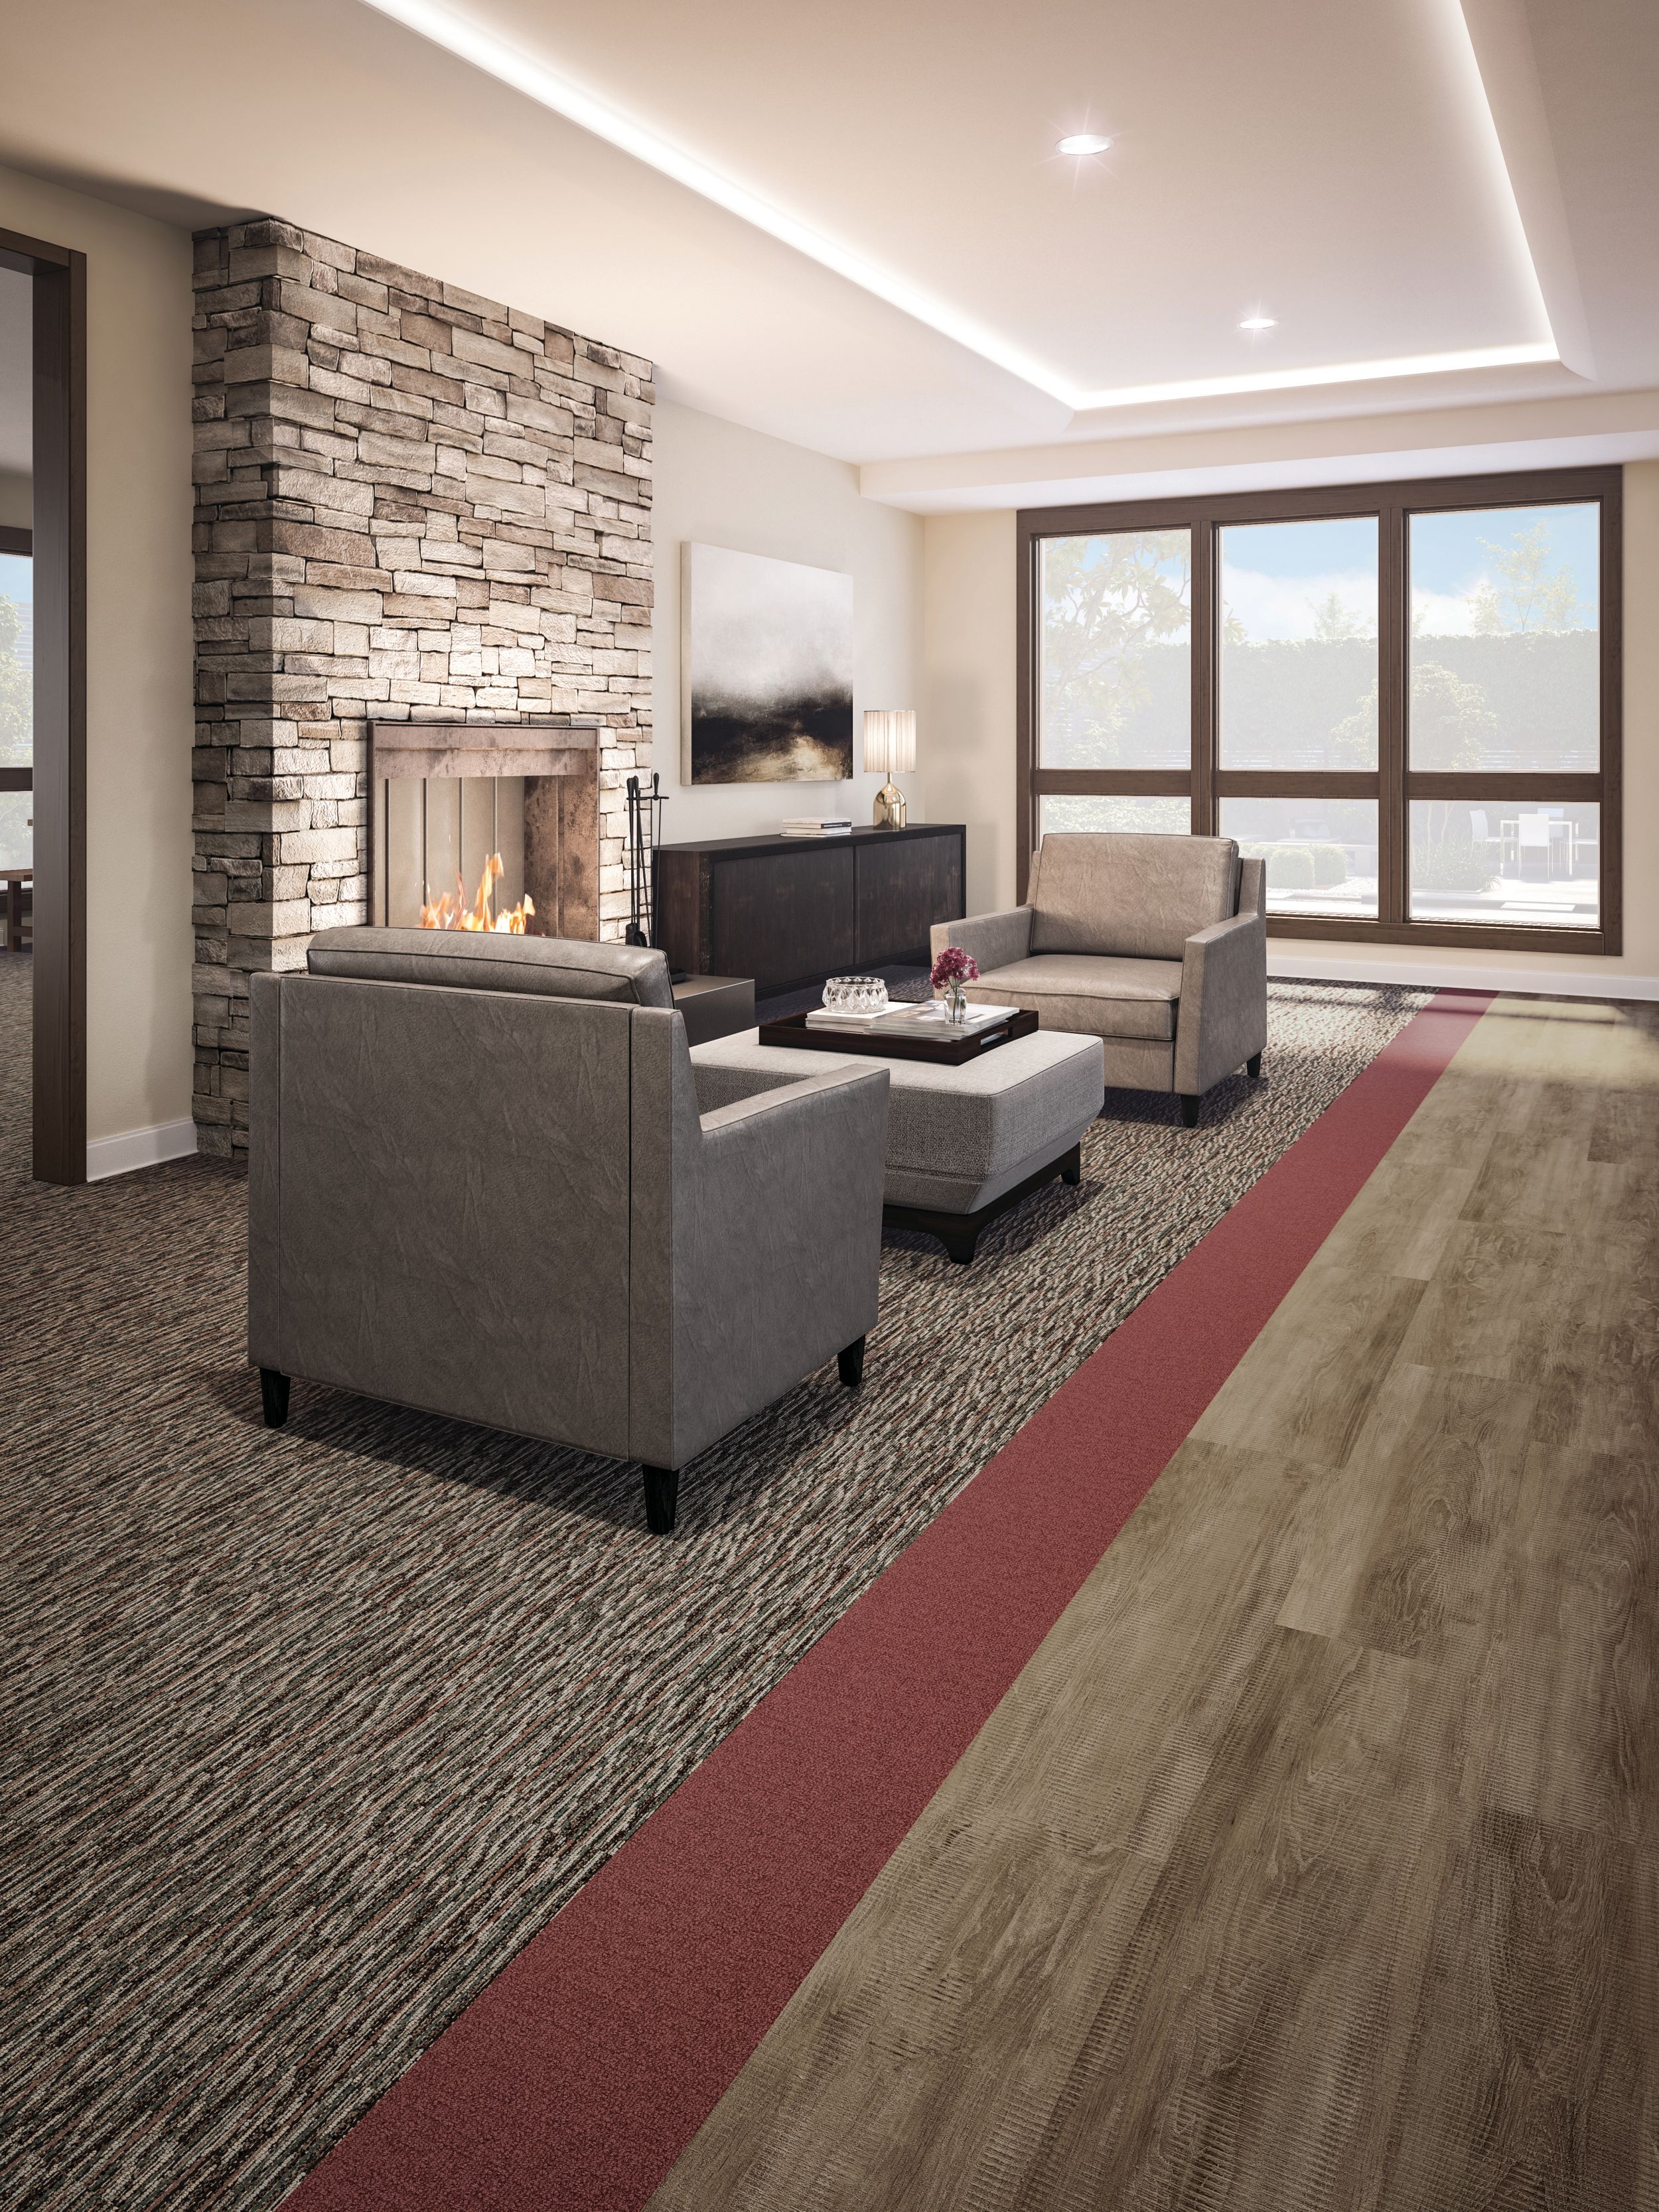 Interface Farmland and Monochrome carpet tile with Textured Woodograins LVT in senior housing seating area with stone fireplace imagen número 8